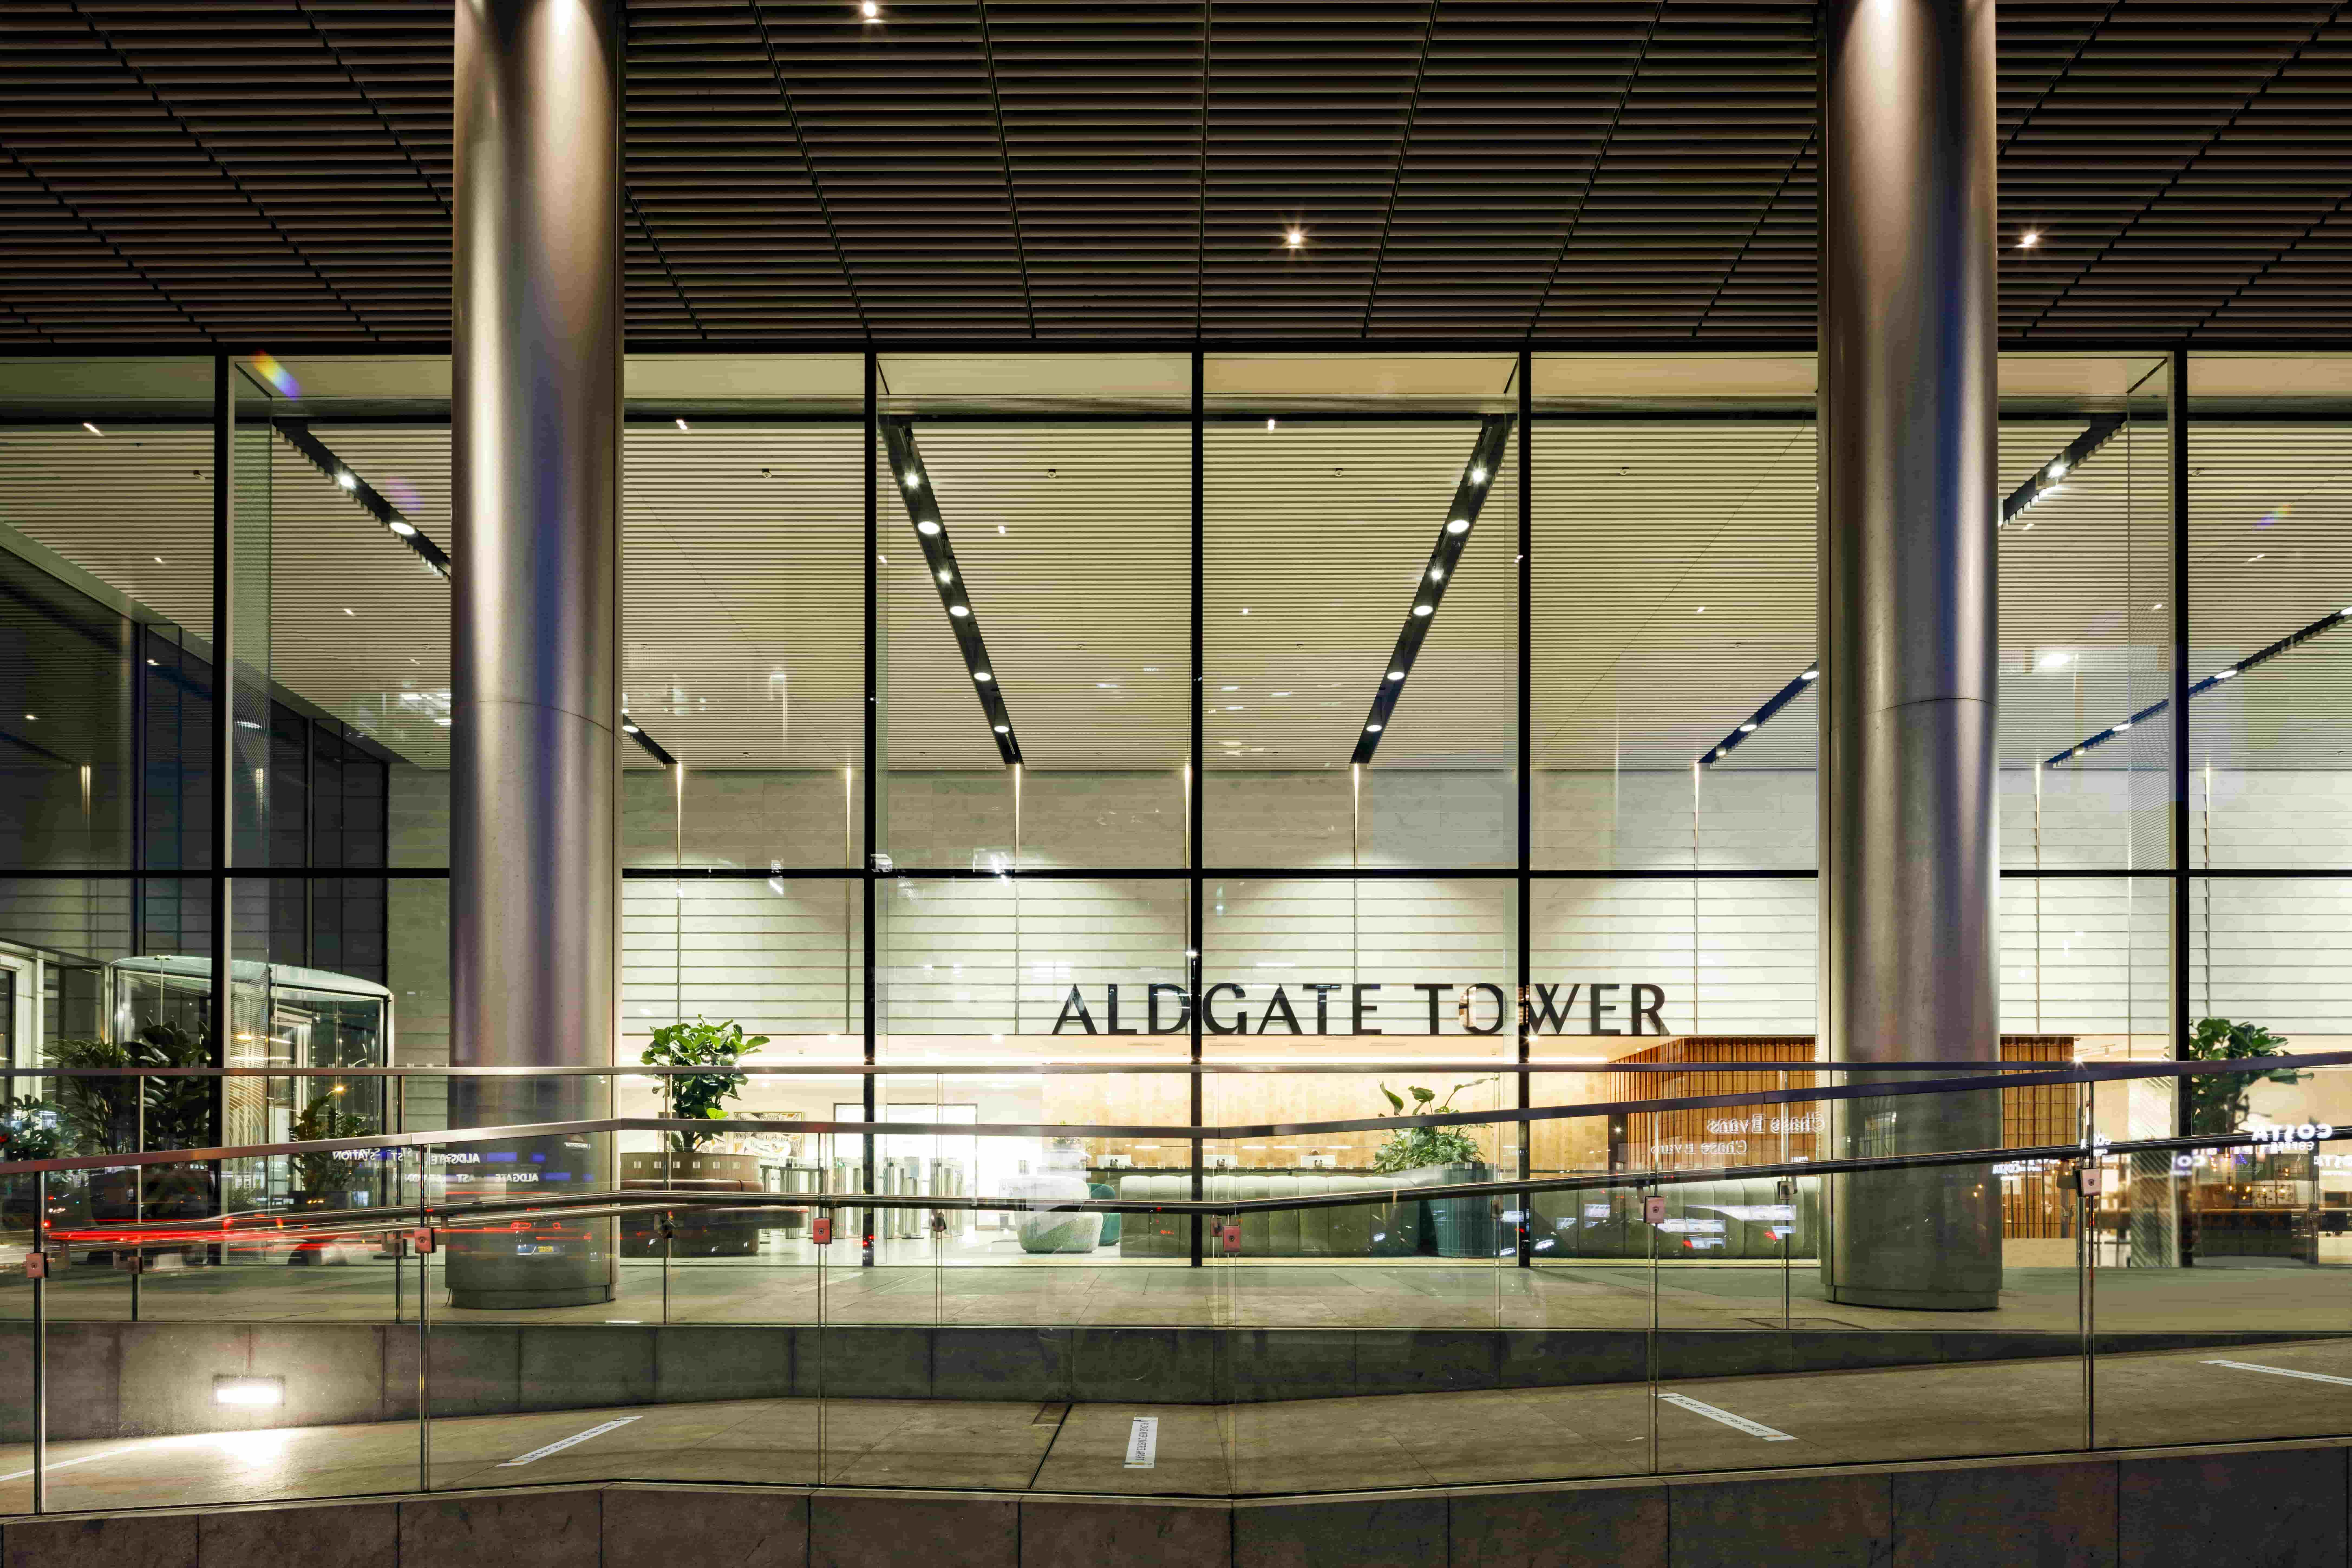 Exterior view of the lobby. The building name, Aldgate Tower, is visible through large, red windows.